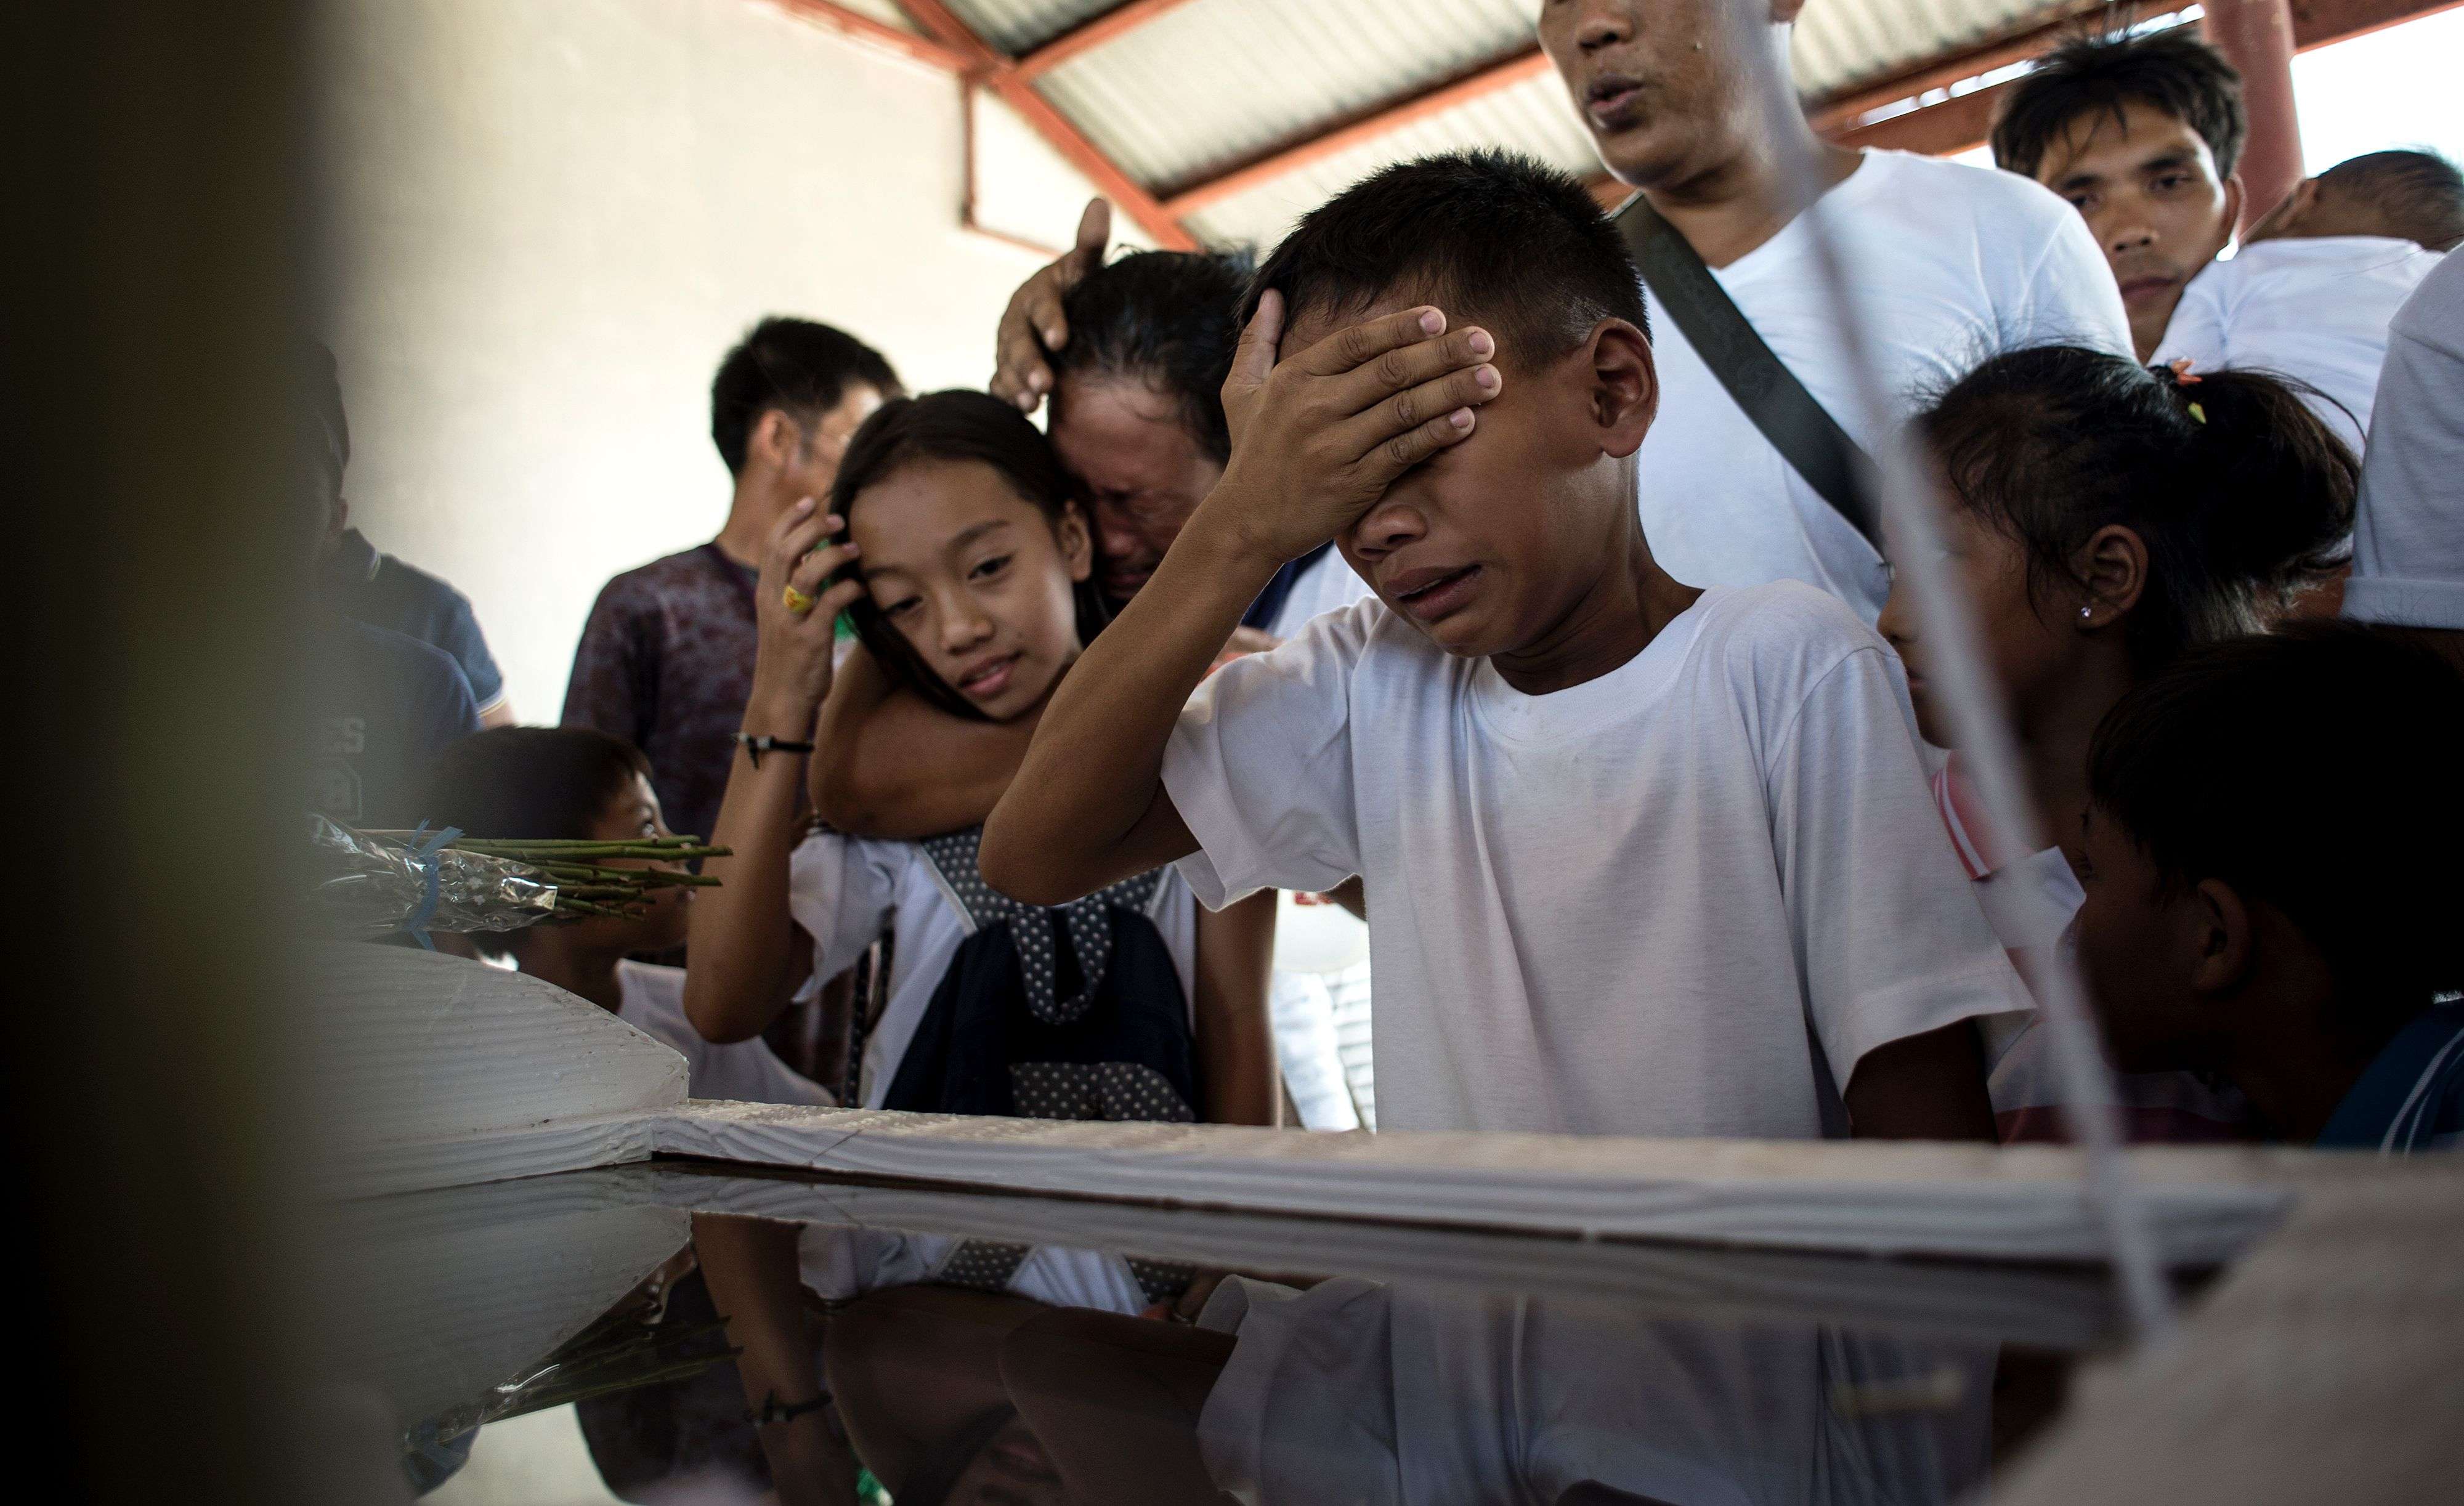 The son of an alleged drug user cries in front of his father’s casket before the burial in the north of Manila, on March 12. The father was gunned down by unidentified men. Photo: AFP